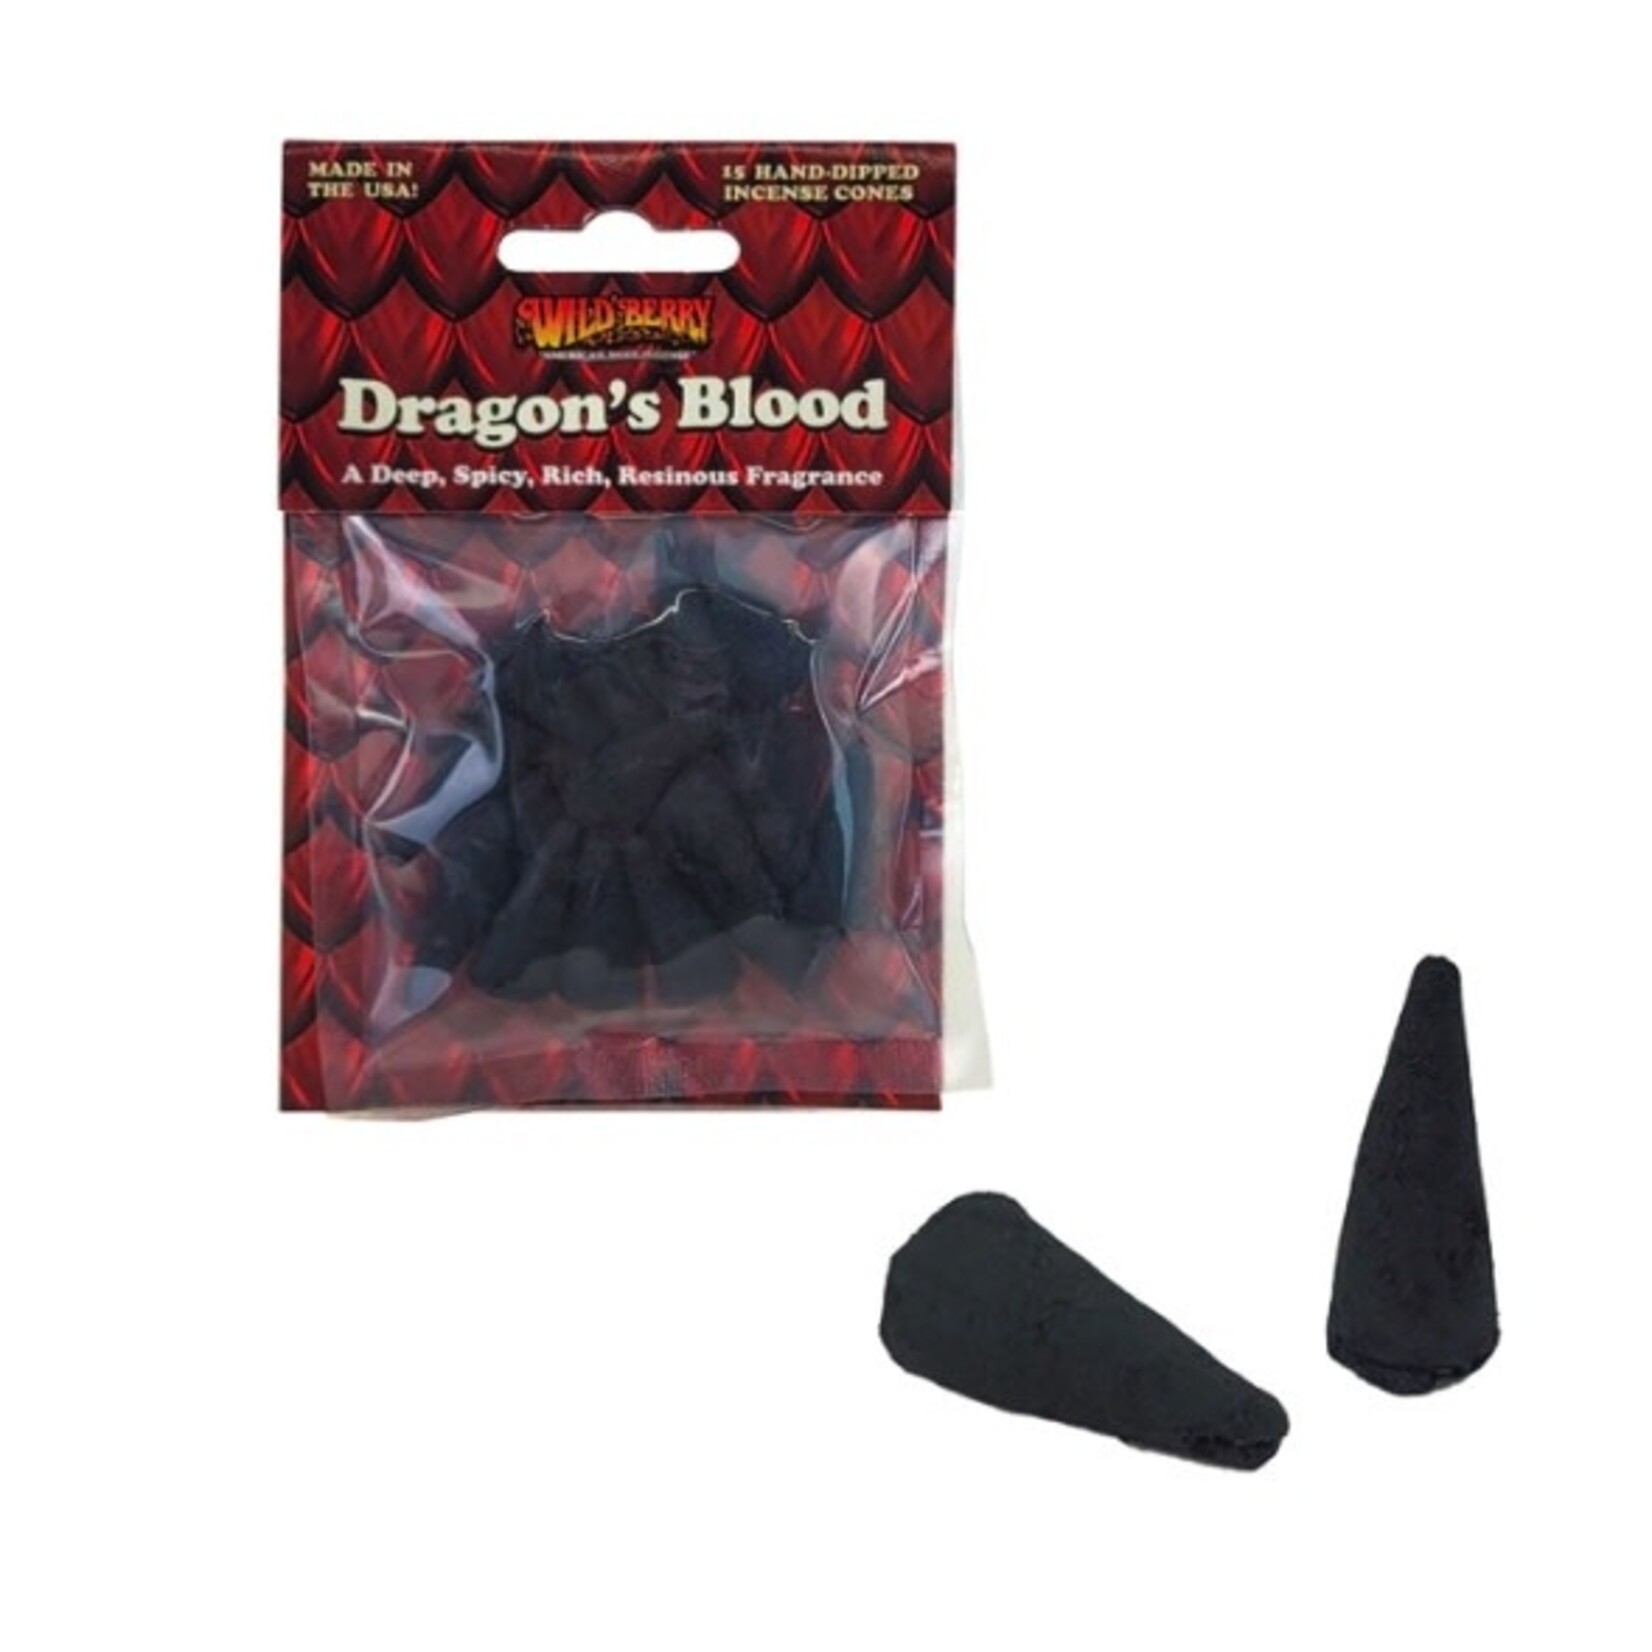 WILDBERRY Wildberry Cones Large Dragon's Blood